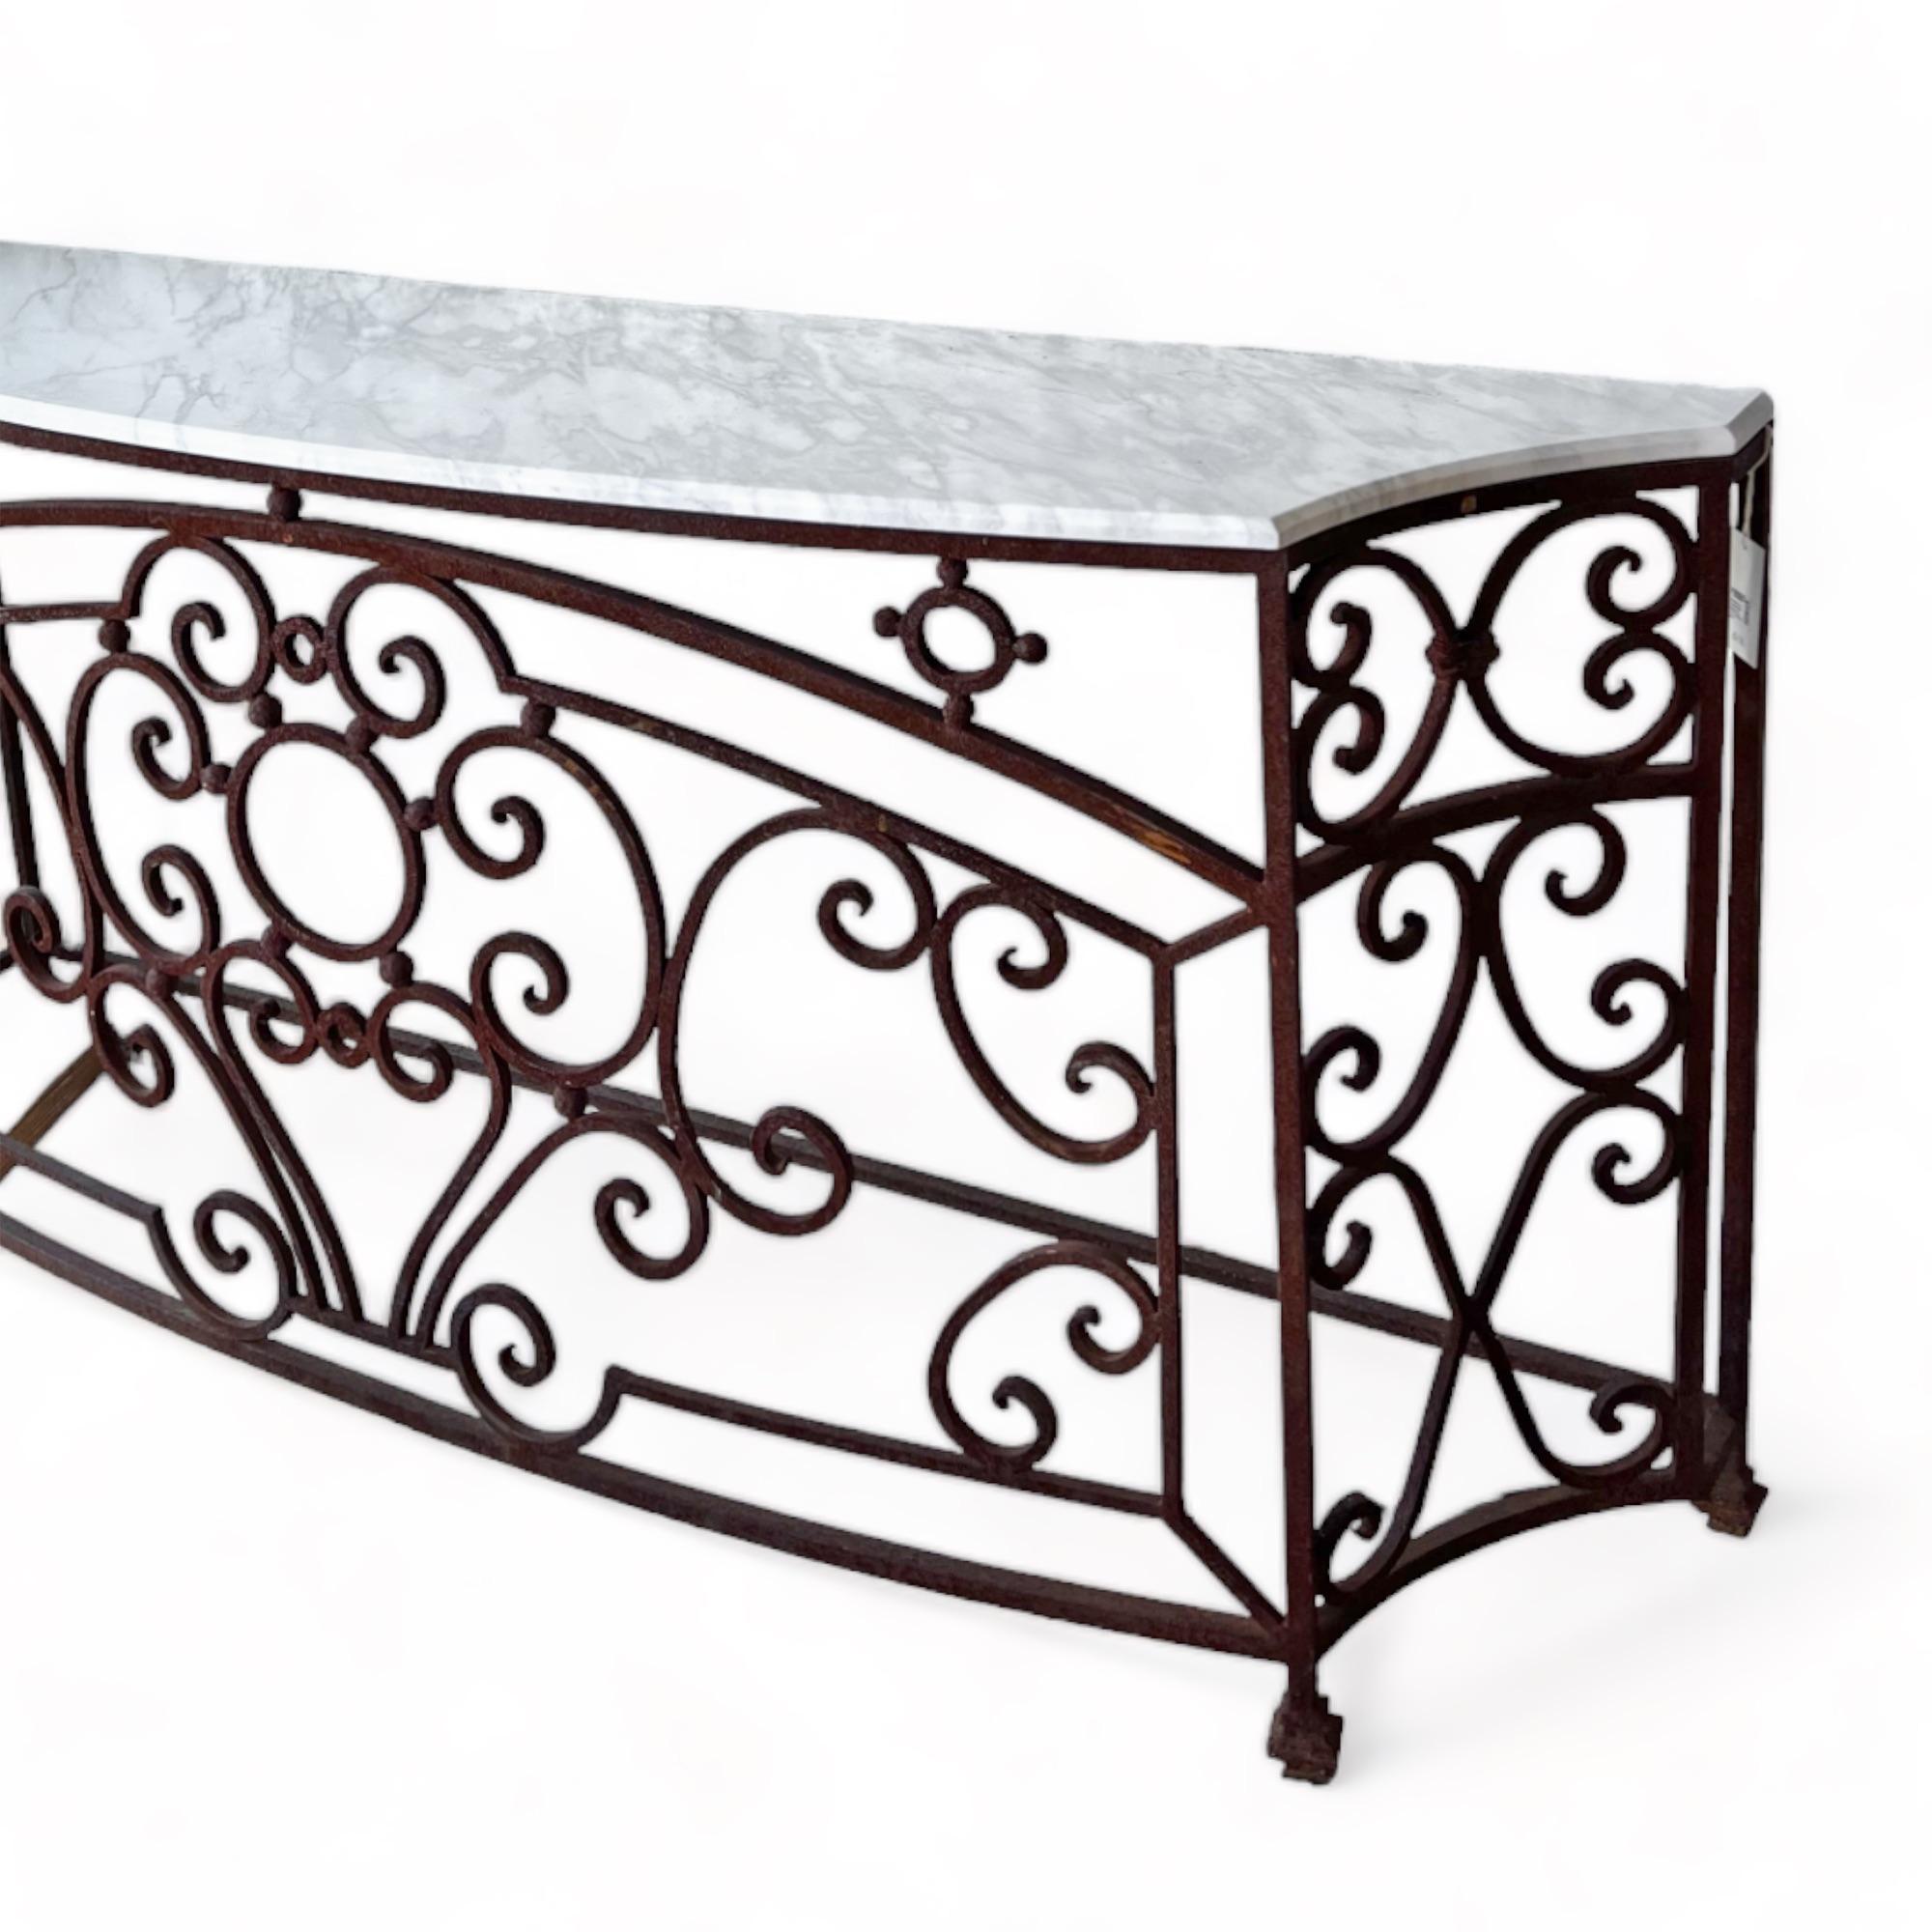 The intricate scrollwork and delicate detailing showcase the timeless beauty of French design. The spacious tabletop provides an ideal surface for displaying decor and its slender profile makes a versatile addition to entryways or foyers.

Measures: